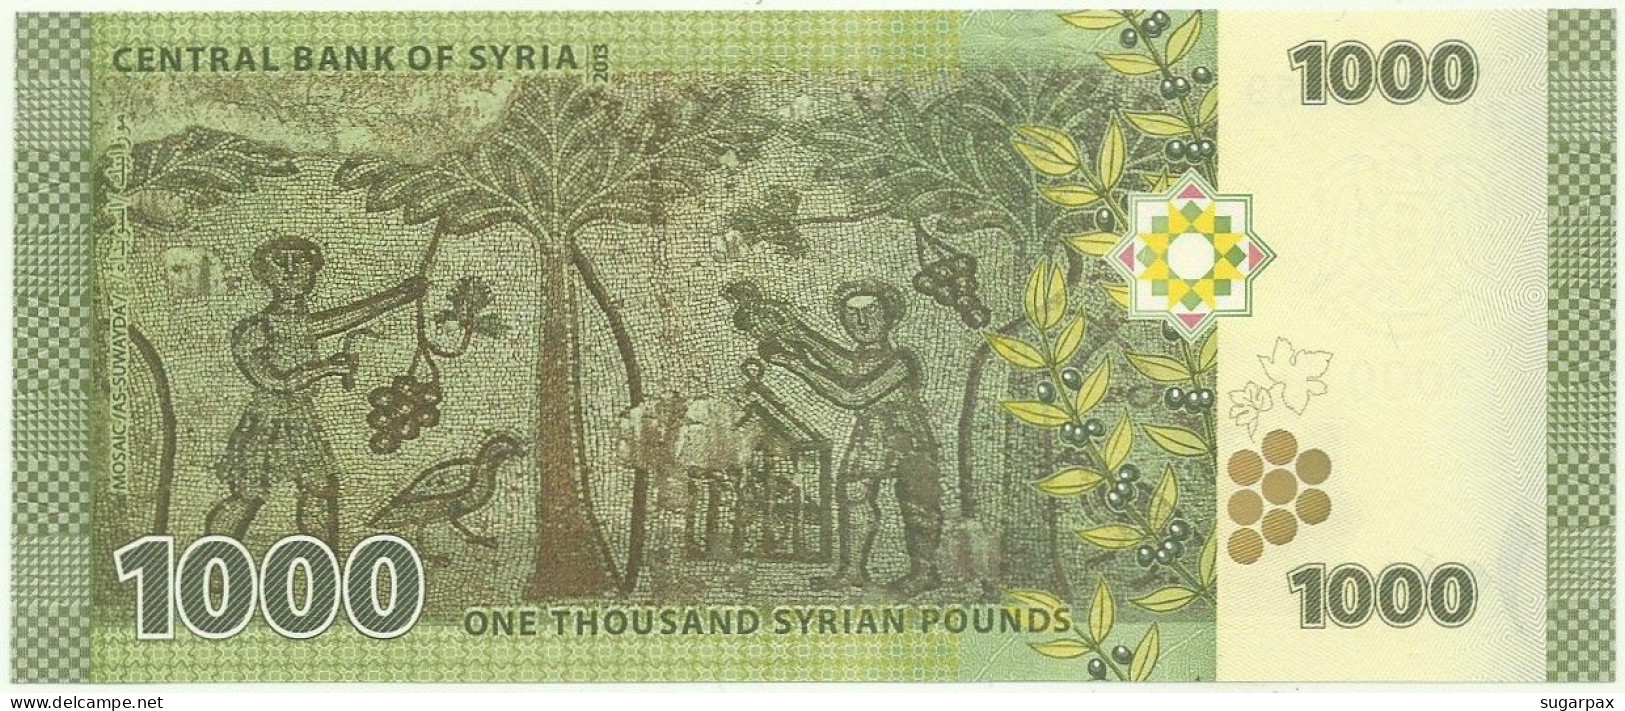 Syria - 1000 Syrian Pounds - 2013 / AH 1434 - Pick 116 - Unc. - Serie A/21 - 1.000 - Syrie